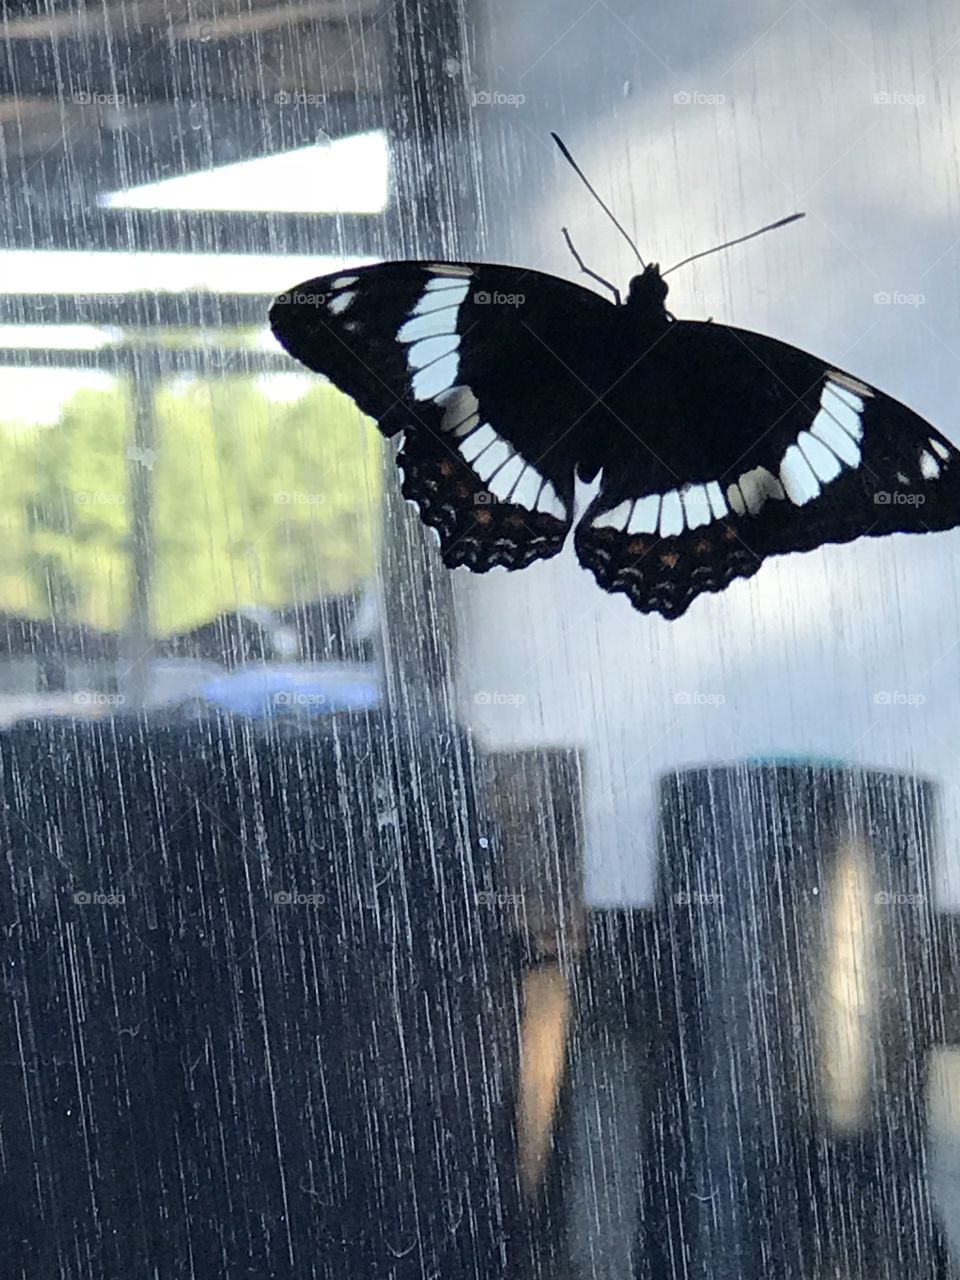 Butterfly on reflected glass window